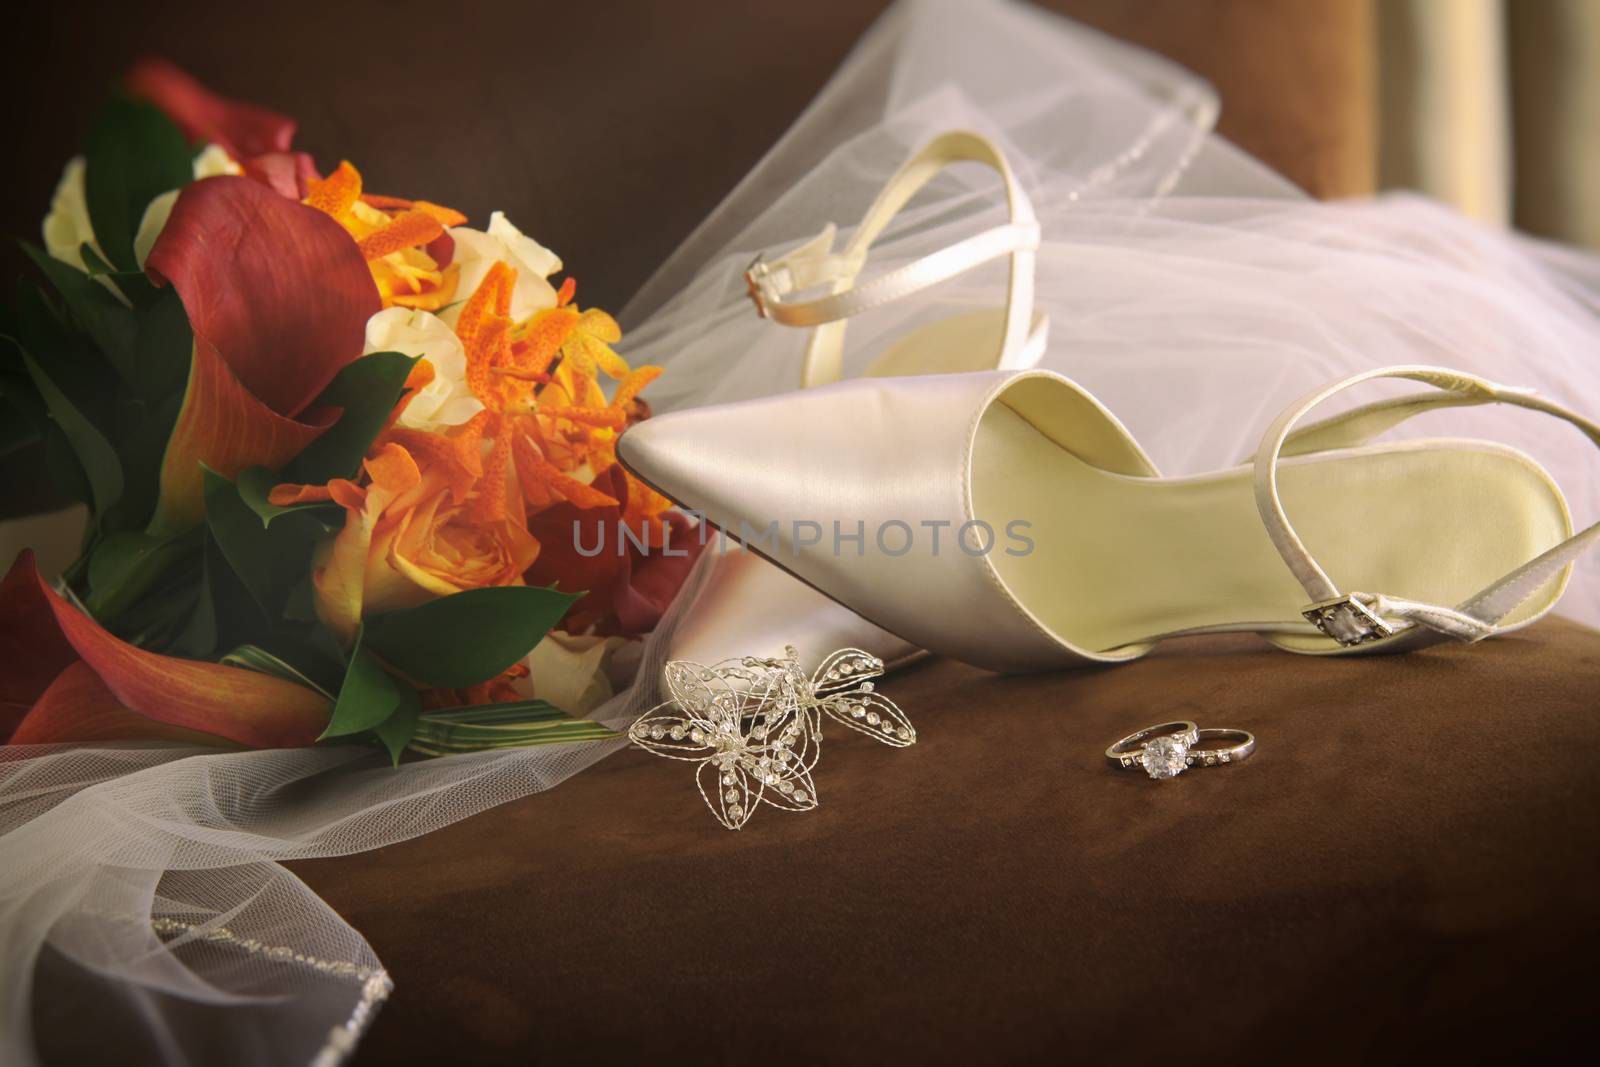 Wedding shoes with veil and rings by Sandralise